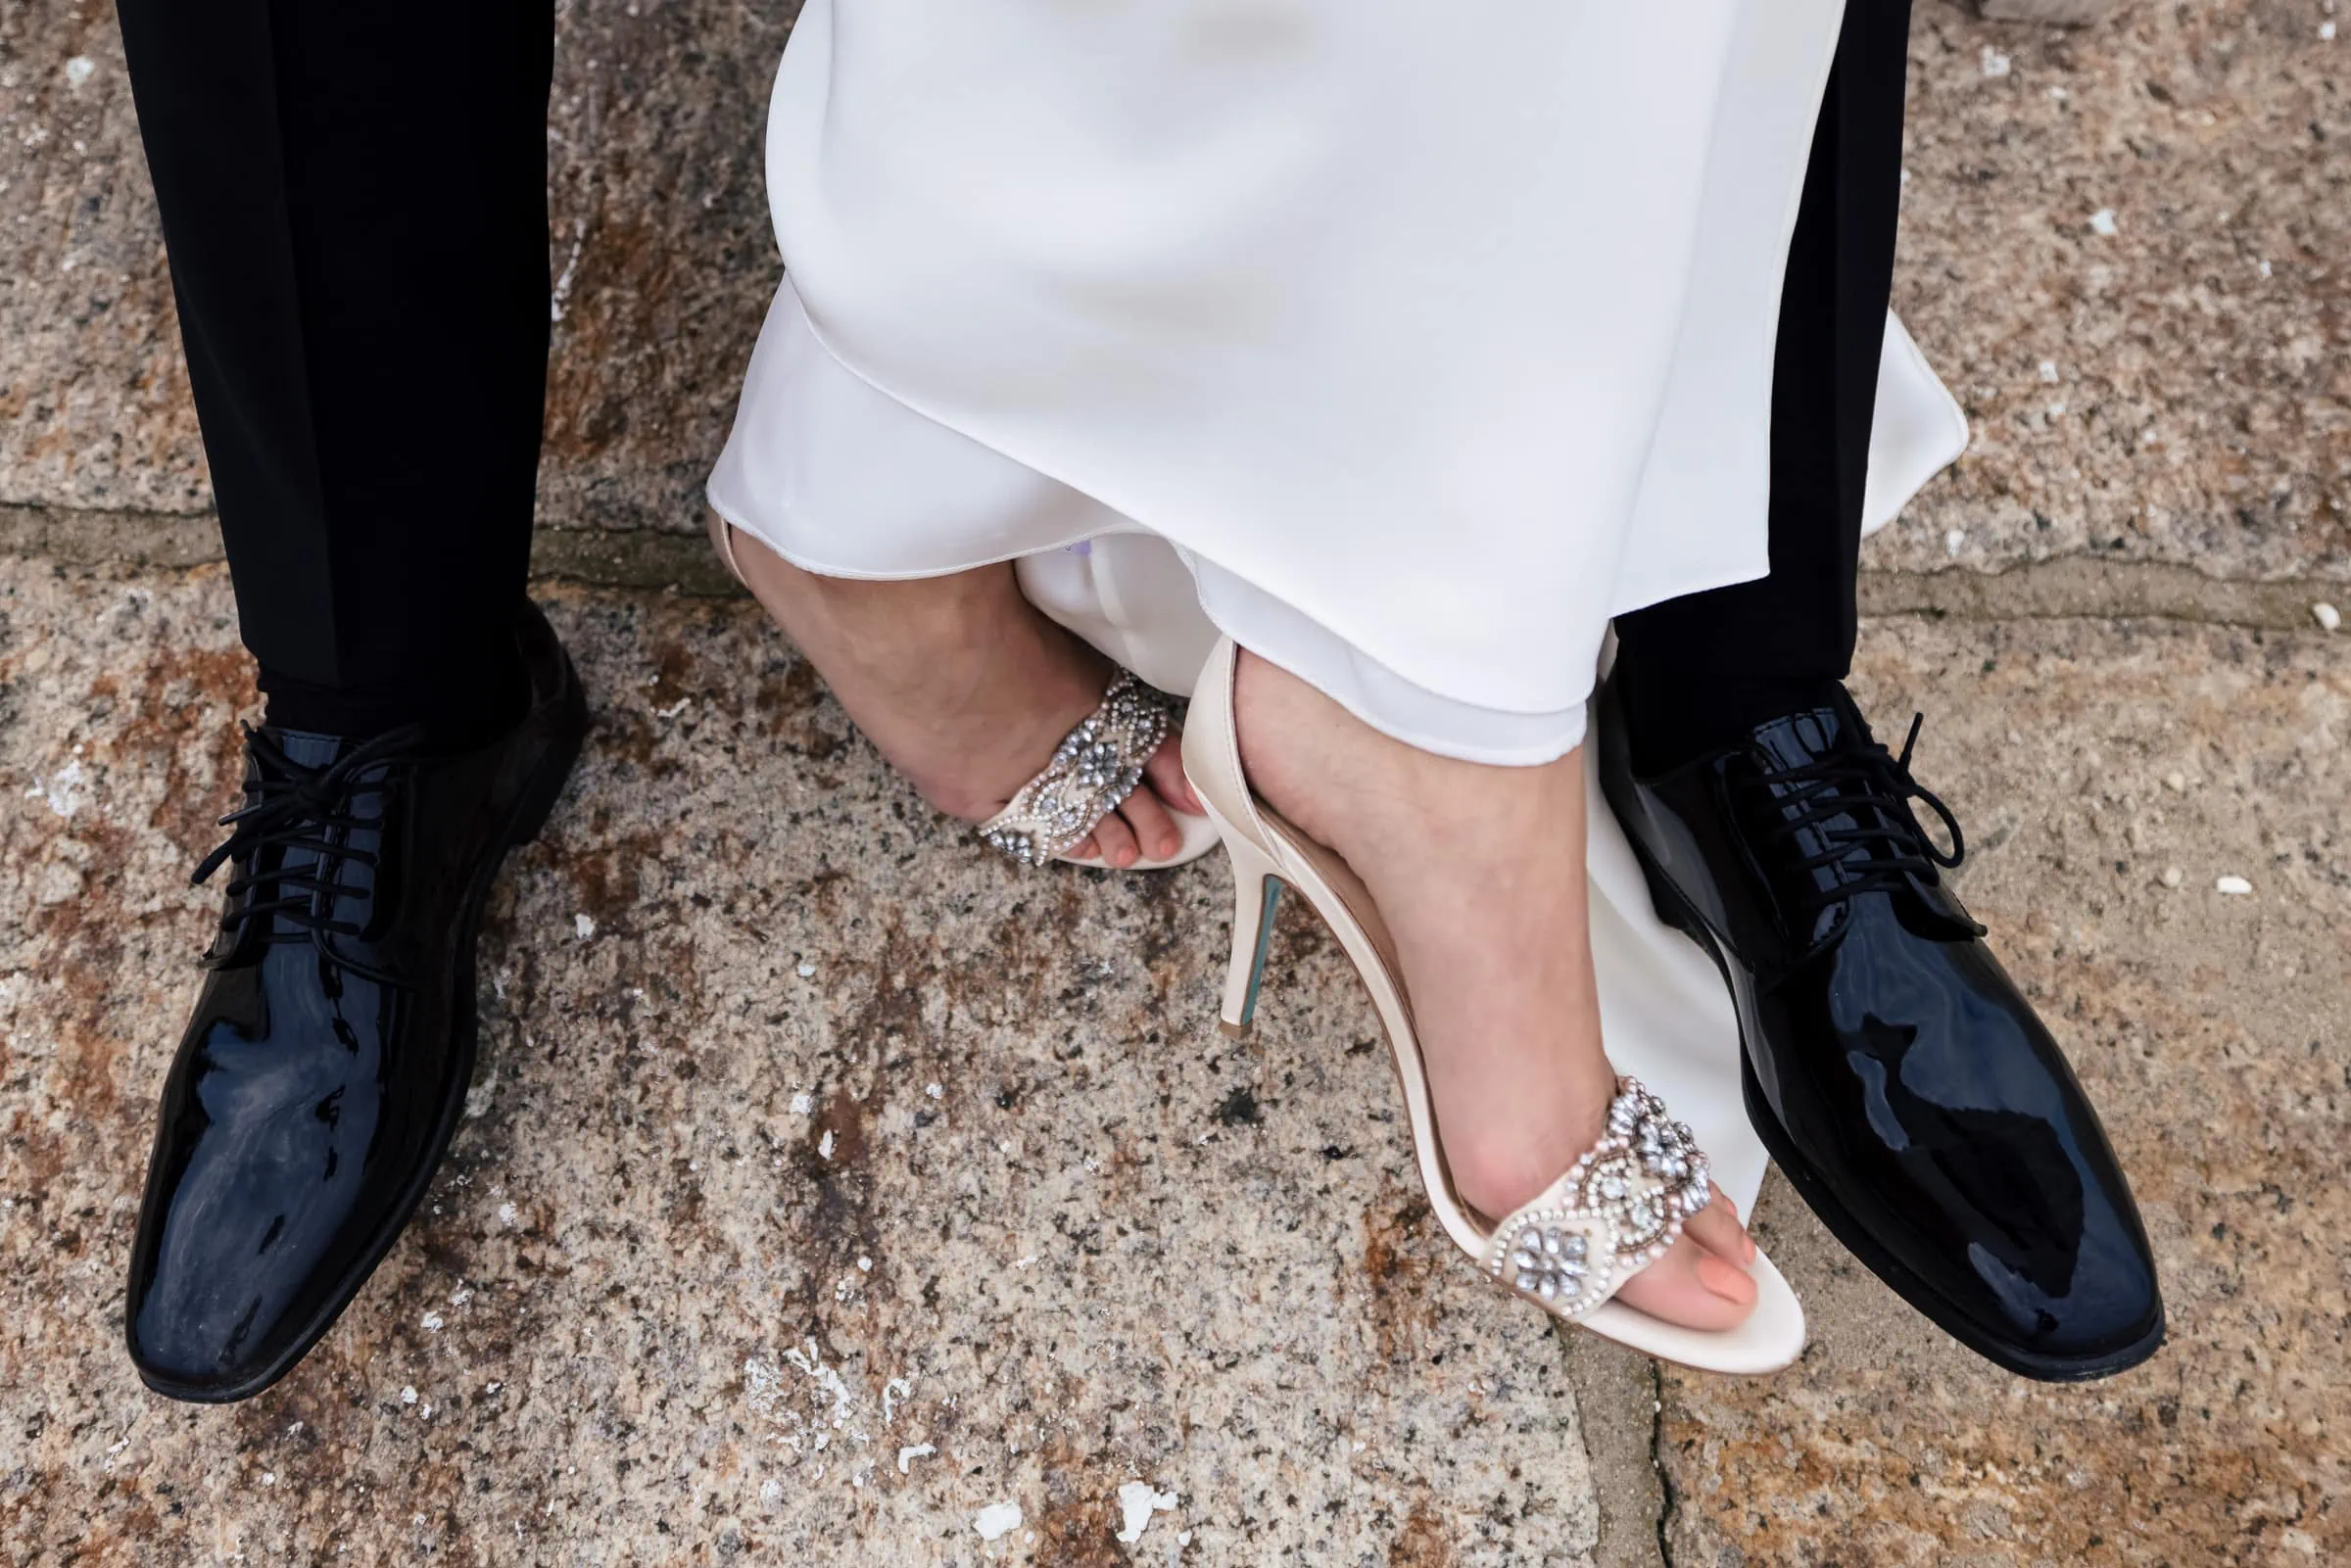 A pair of feet with jeweled heeled shoes poke out from a white dress inbetween another set of legs with black pants and black patent dress shoes